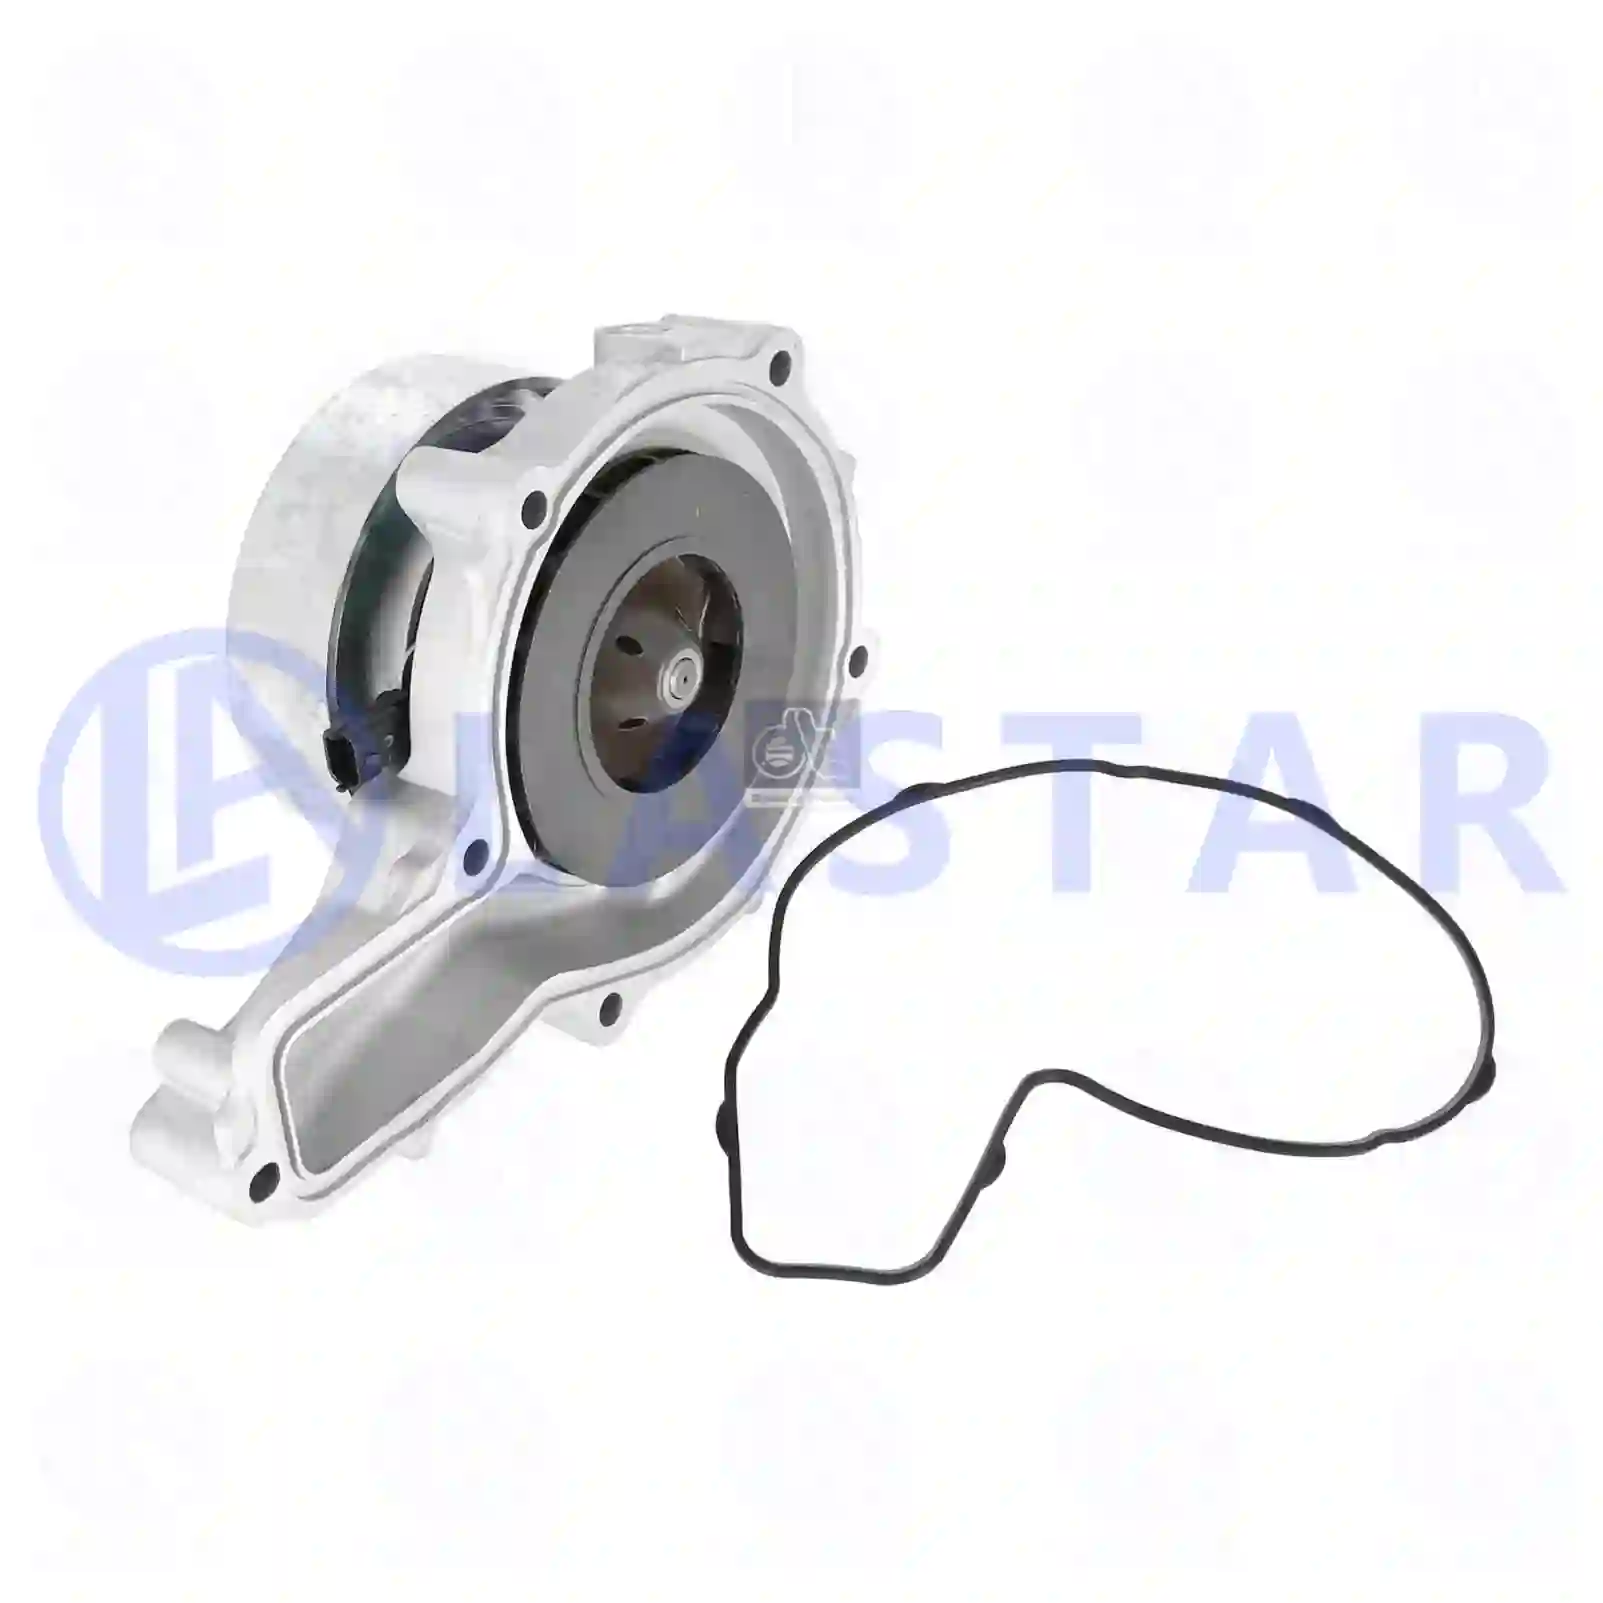 Water pump, with electromagnetic clutch, 77708765, 7421072413, 7421648714, 7421814009, 7421959184, 7421960480, 7421969184, 7421974080, 20920085, 20921917, 21030340, 21648708, 21814009, 21814036, 21960479, 21969183, 85000956, 85013056, 85013425, 85013466, ZG00763-0008 ||  77708765 Lastar Spare Part | Truck Spare Parts, Auotomotive Spare Parts Water pump, with electromagnetic clutch, 77708765, 7421072413, 7421648714, 7421814009, 7421959184, 7421960480, 7421969184, 7421974080, 20920085, 20921917, 21030340, 21648708, 21814009, 21814036, 21960479, 21969183, 85000956, 85013056, 85013425, 85013466, ZG00763-0008 ||  77708765 Lastar Spare Part | Truck Spare Parts, Auotomotive Spare Parts